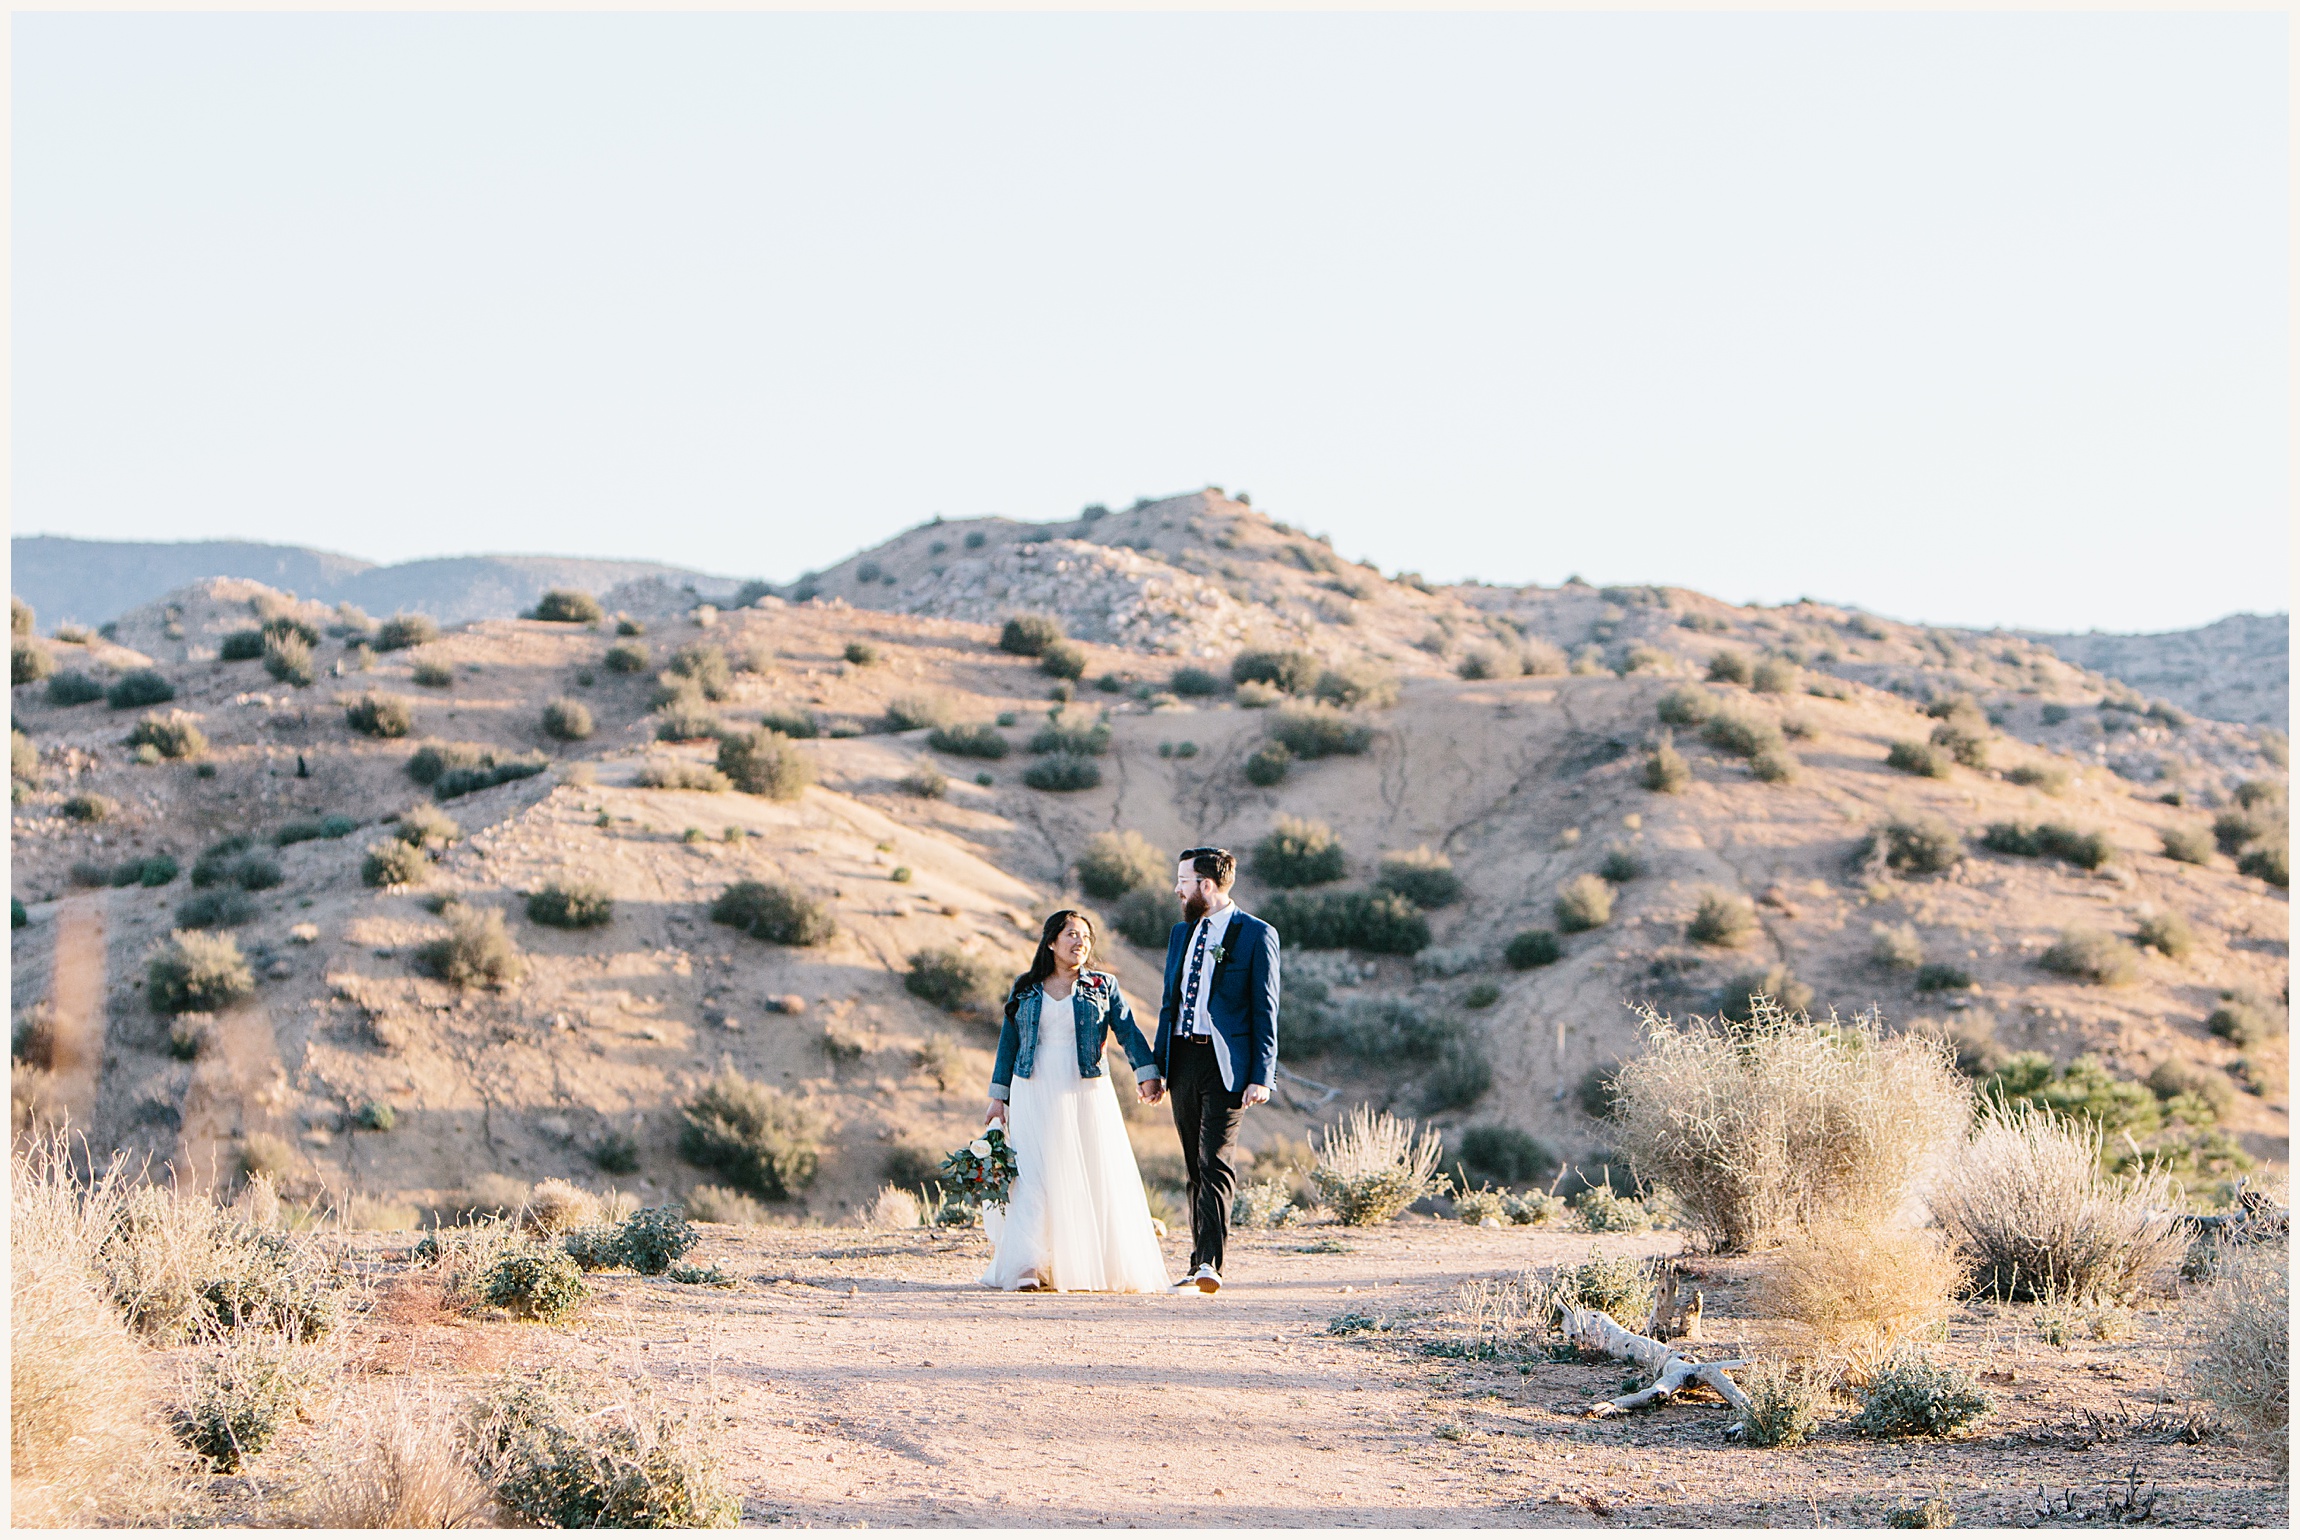 Photo of bride wearing off the shoulder white elopement dress with a jean jacket and groom wearing a blue wedding suit